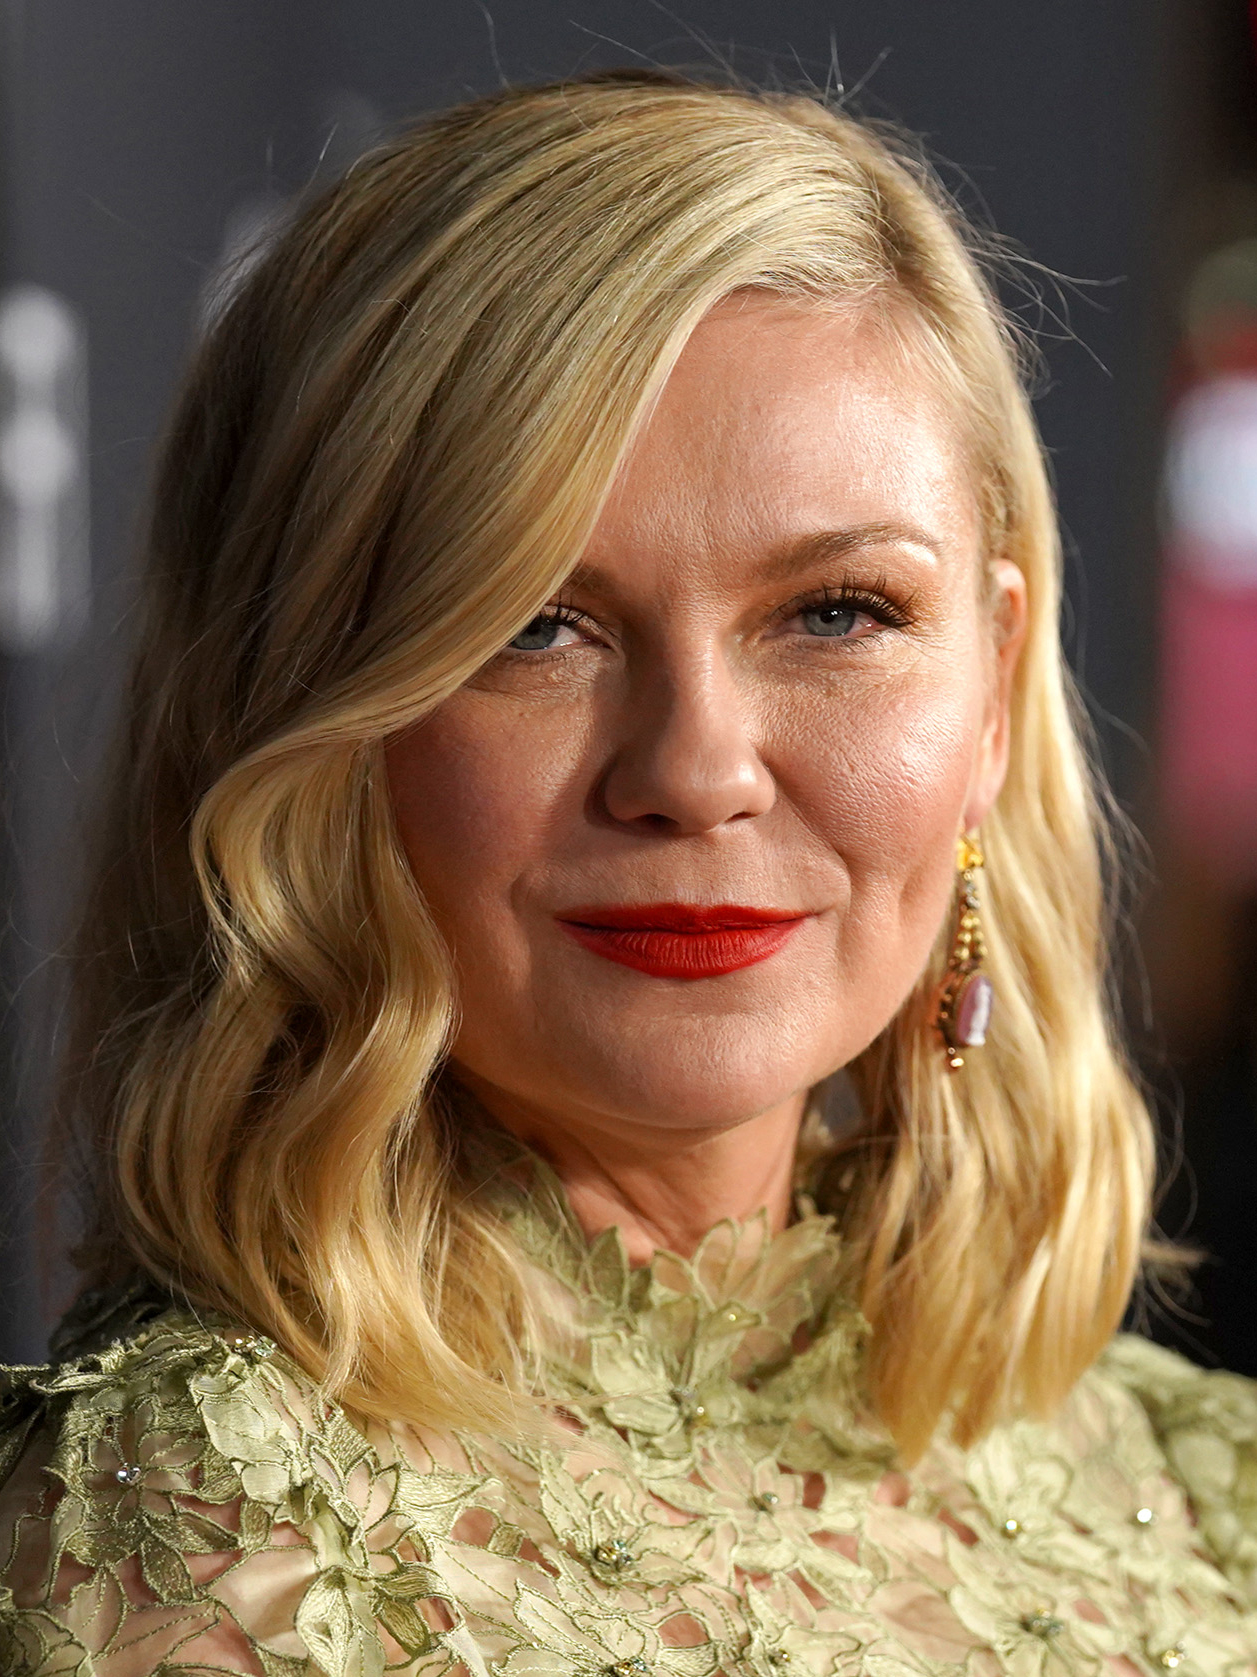 Nominee Profile 2022: Kirsten Dunst, “The Power of the Dog